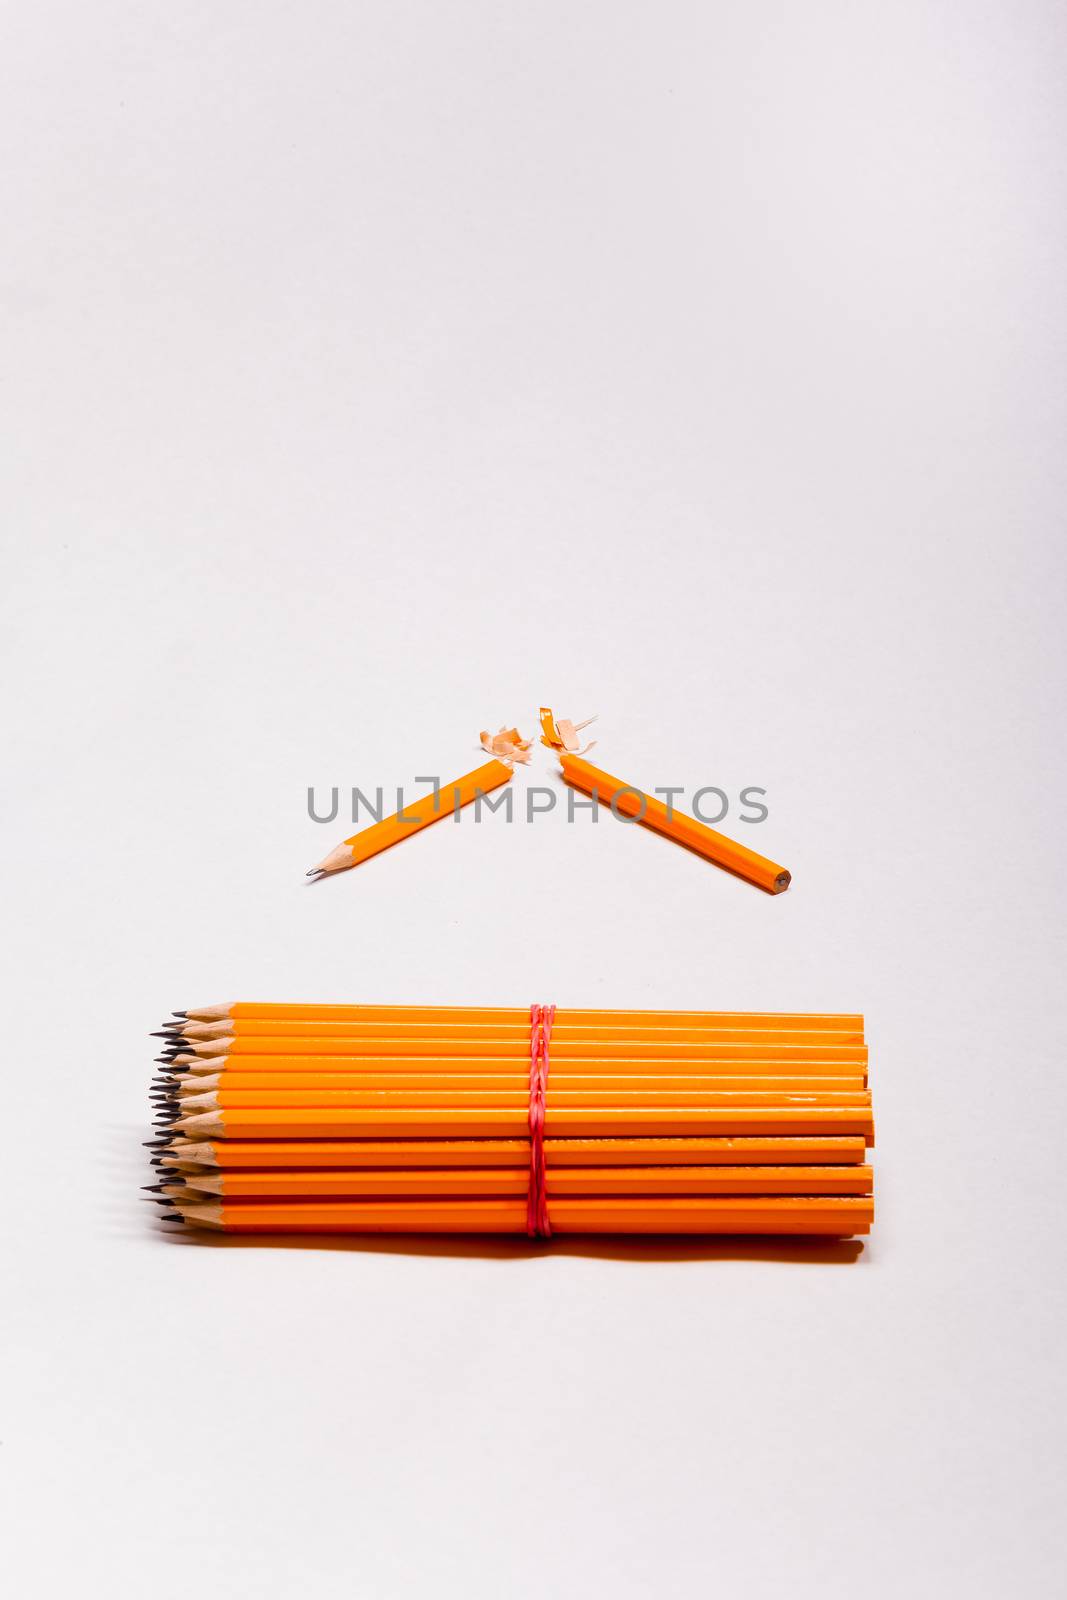 yellow pencils and a broken pencil by STphotography